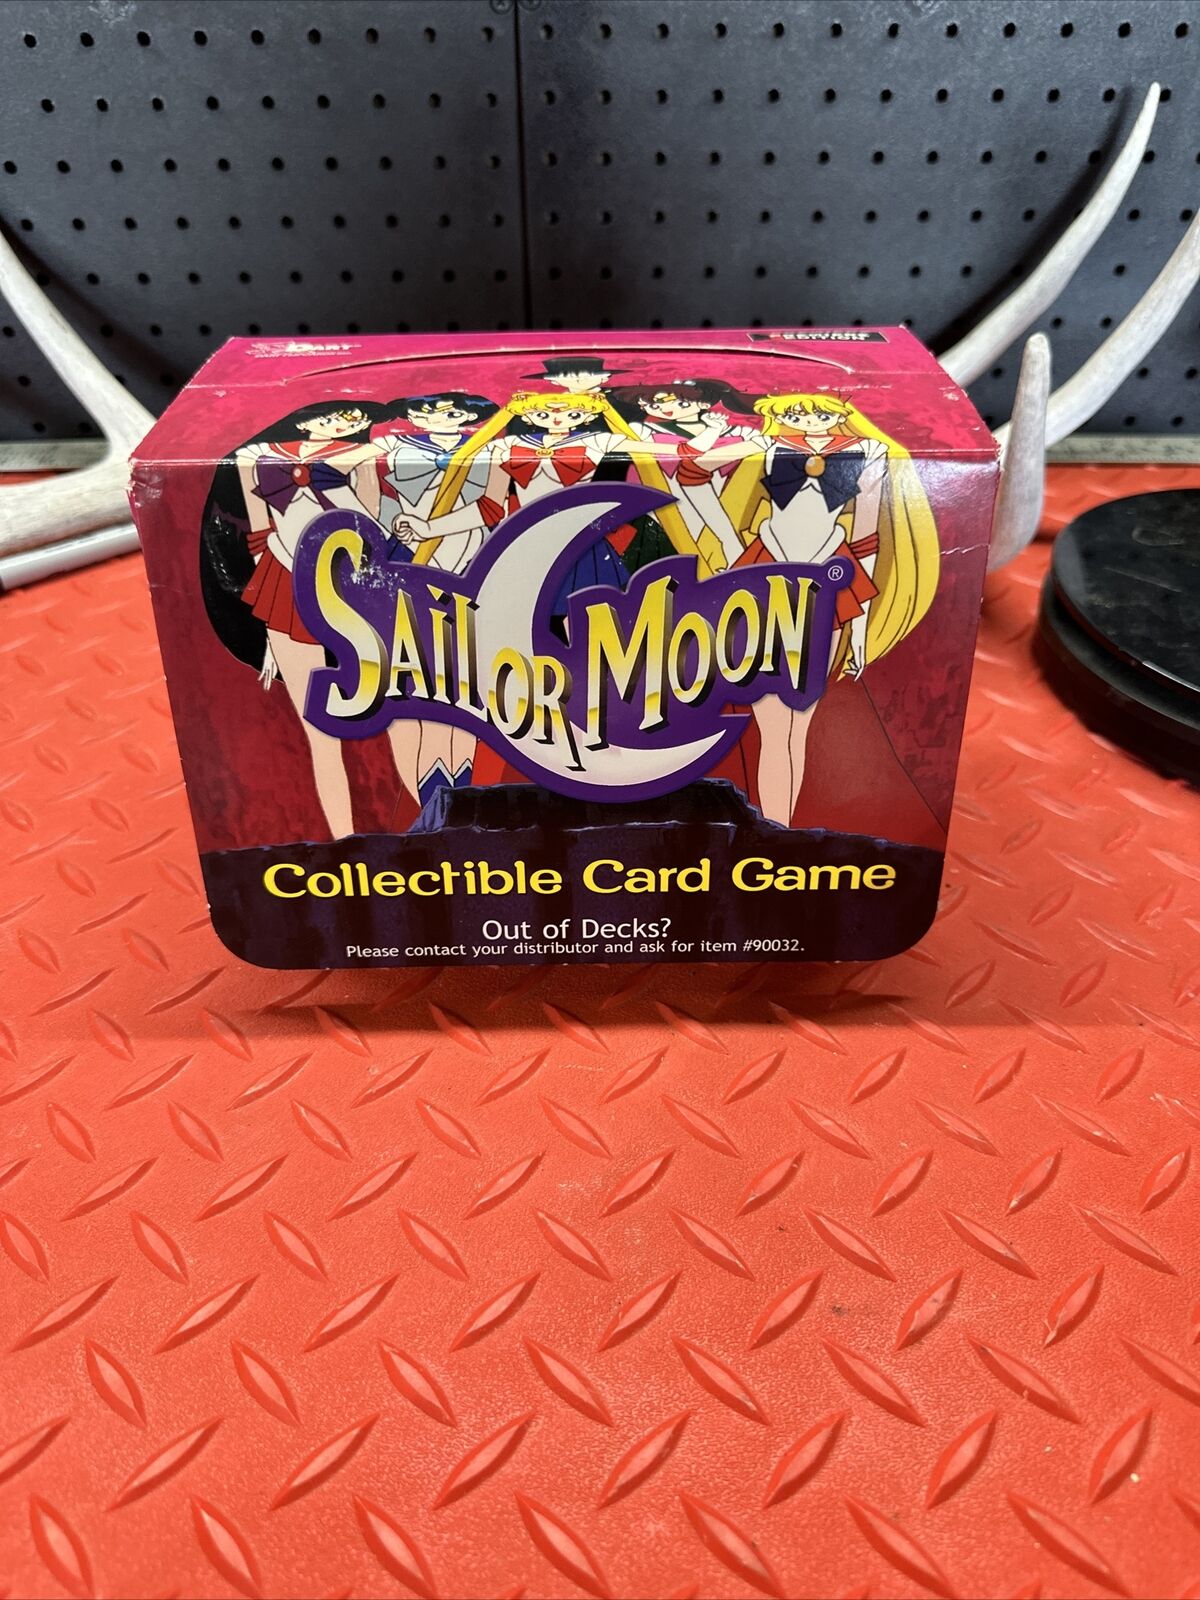 Sailor Moon Collectible Card Game Sealed Box of 6 Two Player Starter Decks RARE